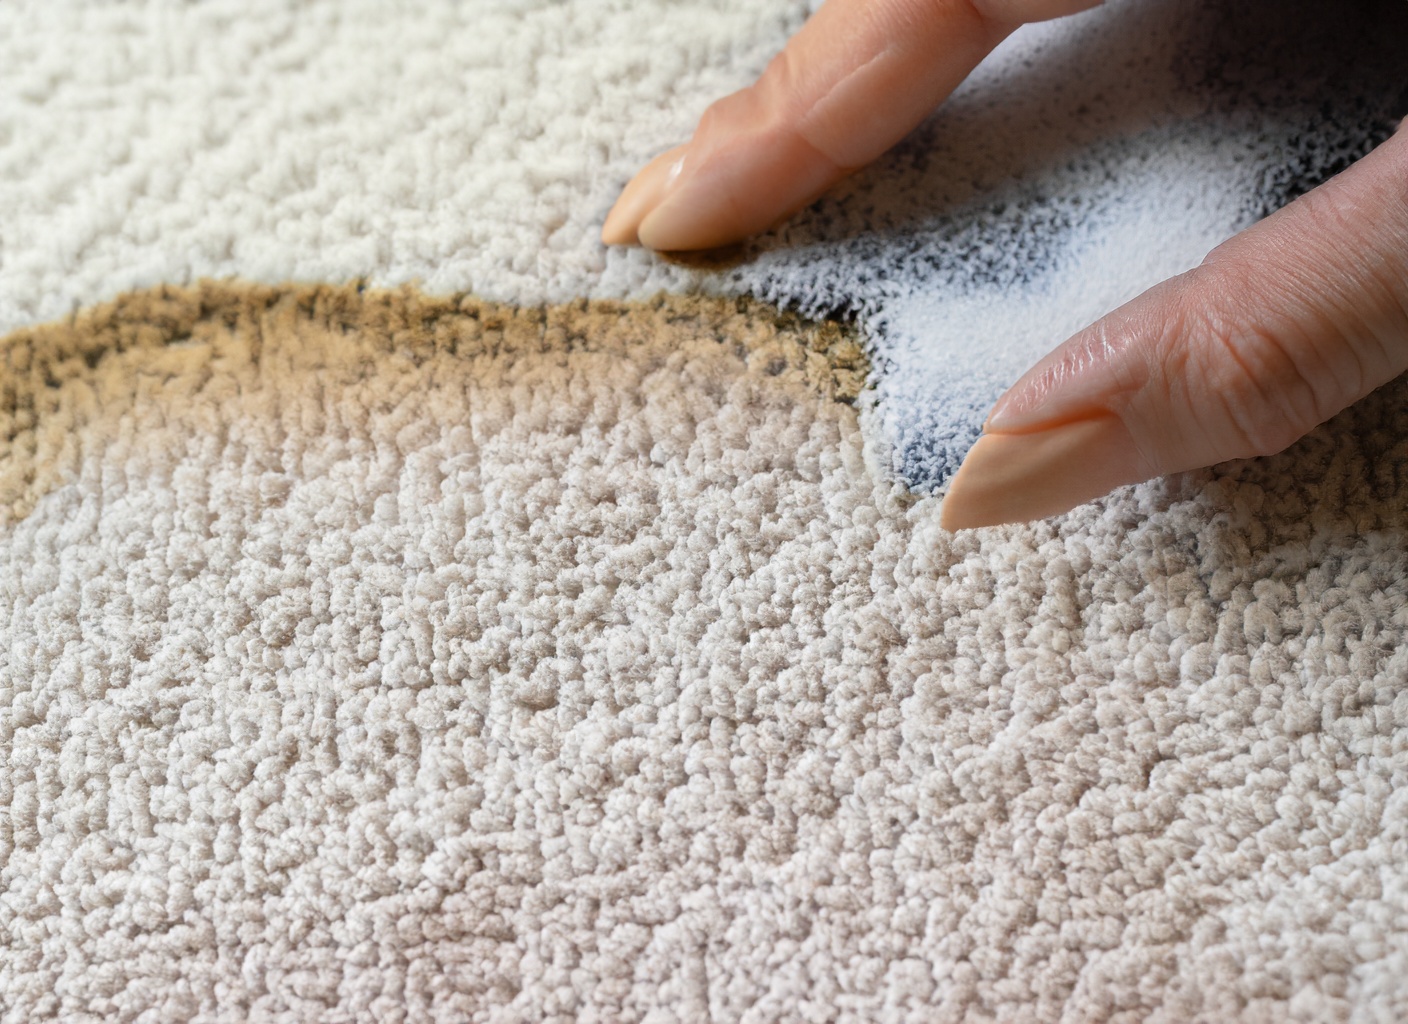 How to Get Oil Out of Carpet: Guide to Effective Stain Removal